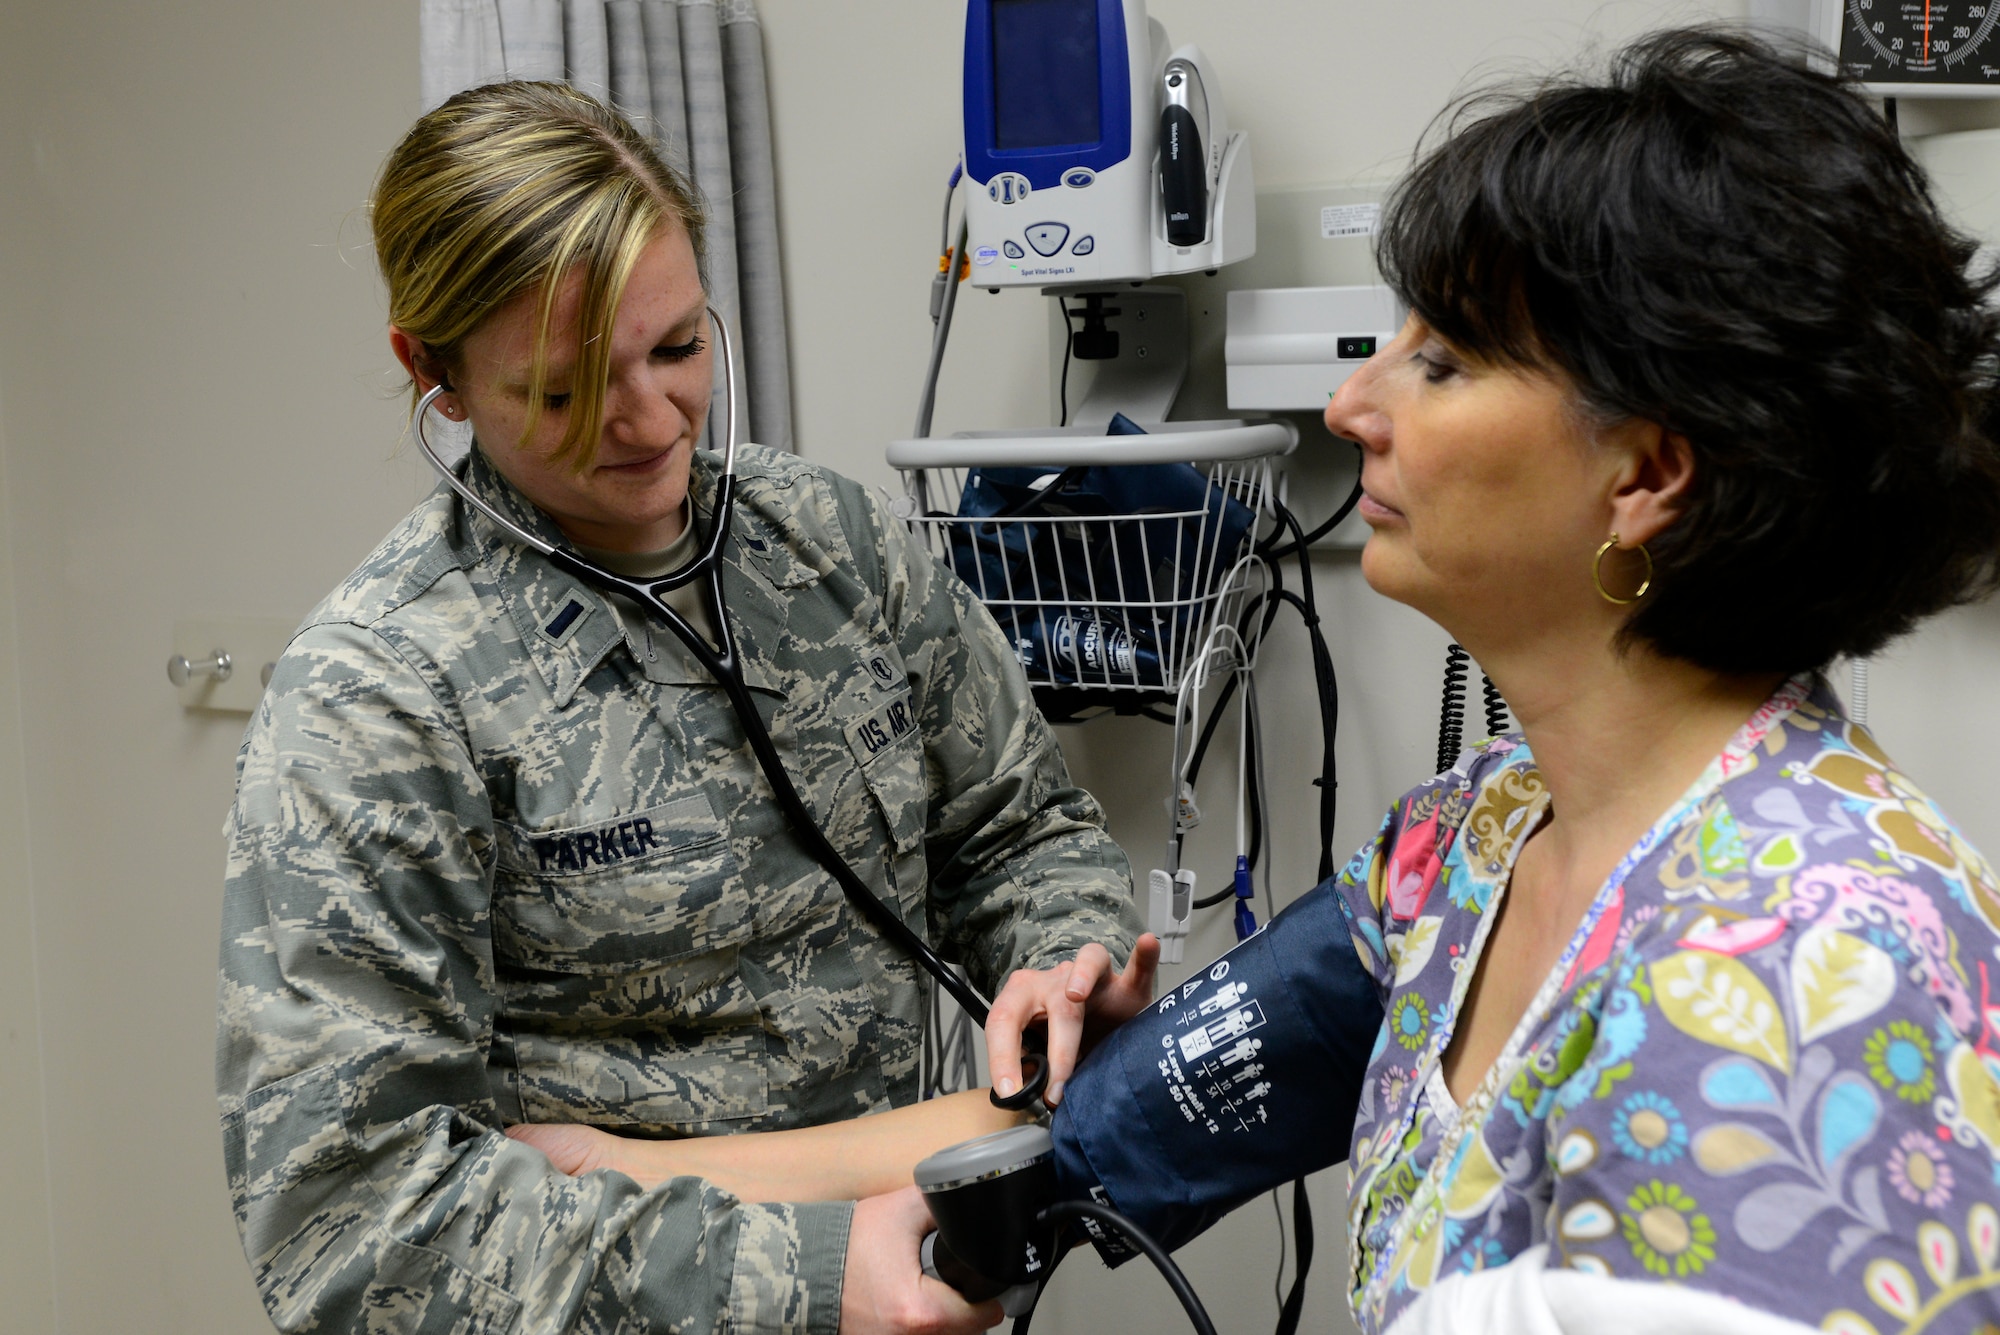 1st Lt. Holly Parker, 22nd Medical Operations Squadron Physician Assistant, checks a patient’s blood pressure, April 22, 2015, at McConnell Air Force Base, Kan. Parker is one of three PAs at Team McConnell and is part of a team who serves more than 11,000 beneficiaries across Team McConnell. (U.S. Air Force photo by Senior Airman Trevor Rhynes)